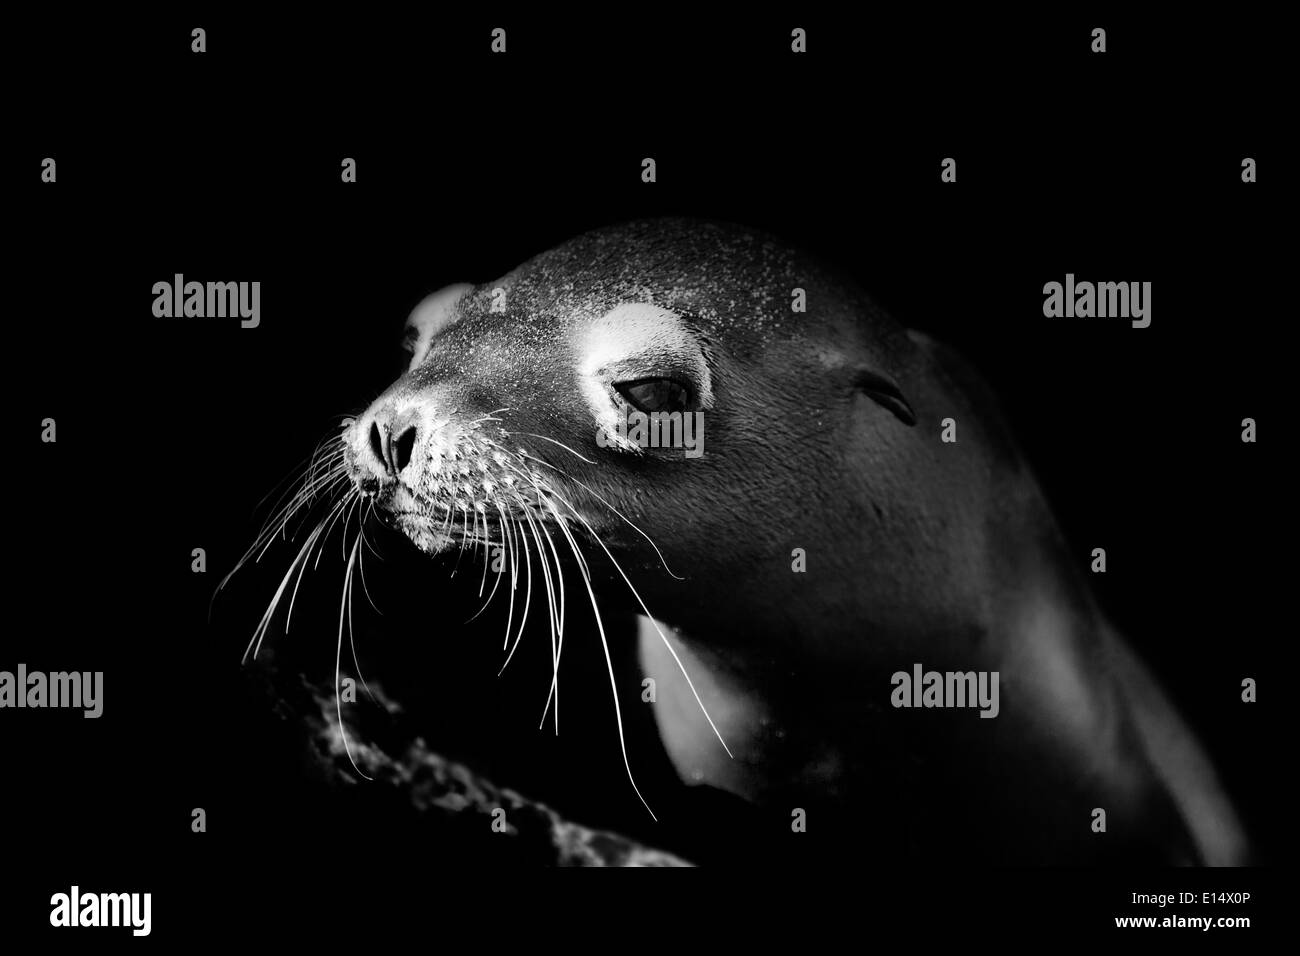 Young Sea Lion against dark background Stock Photo